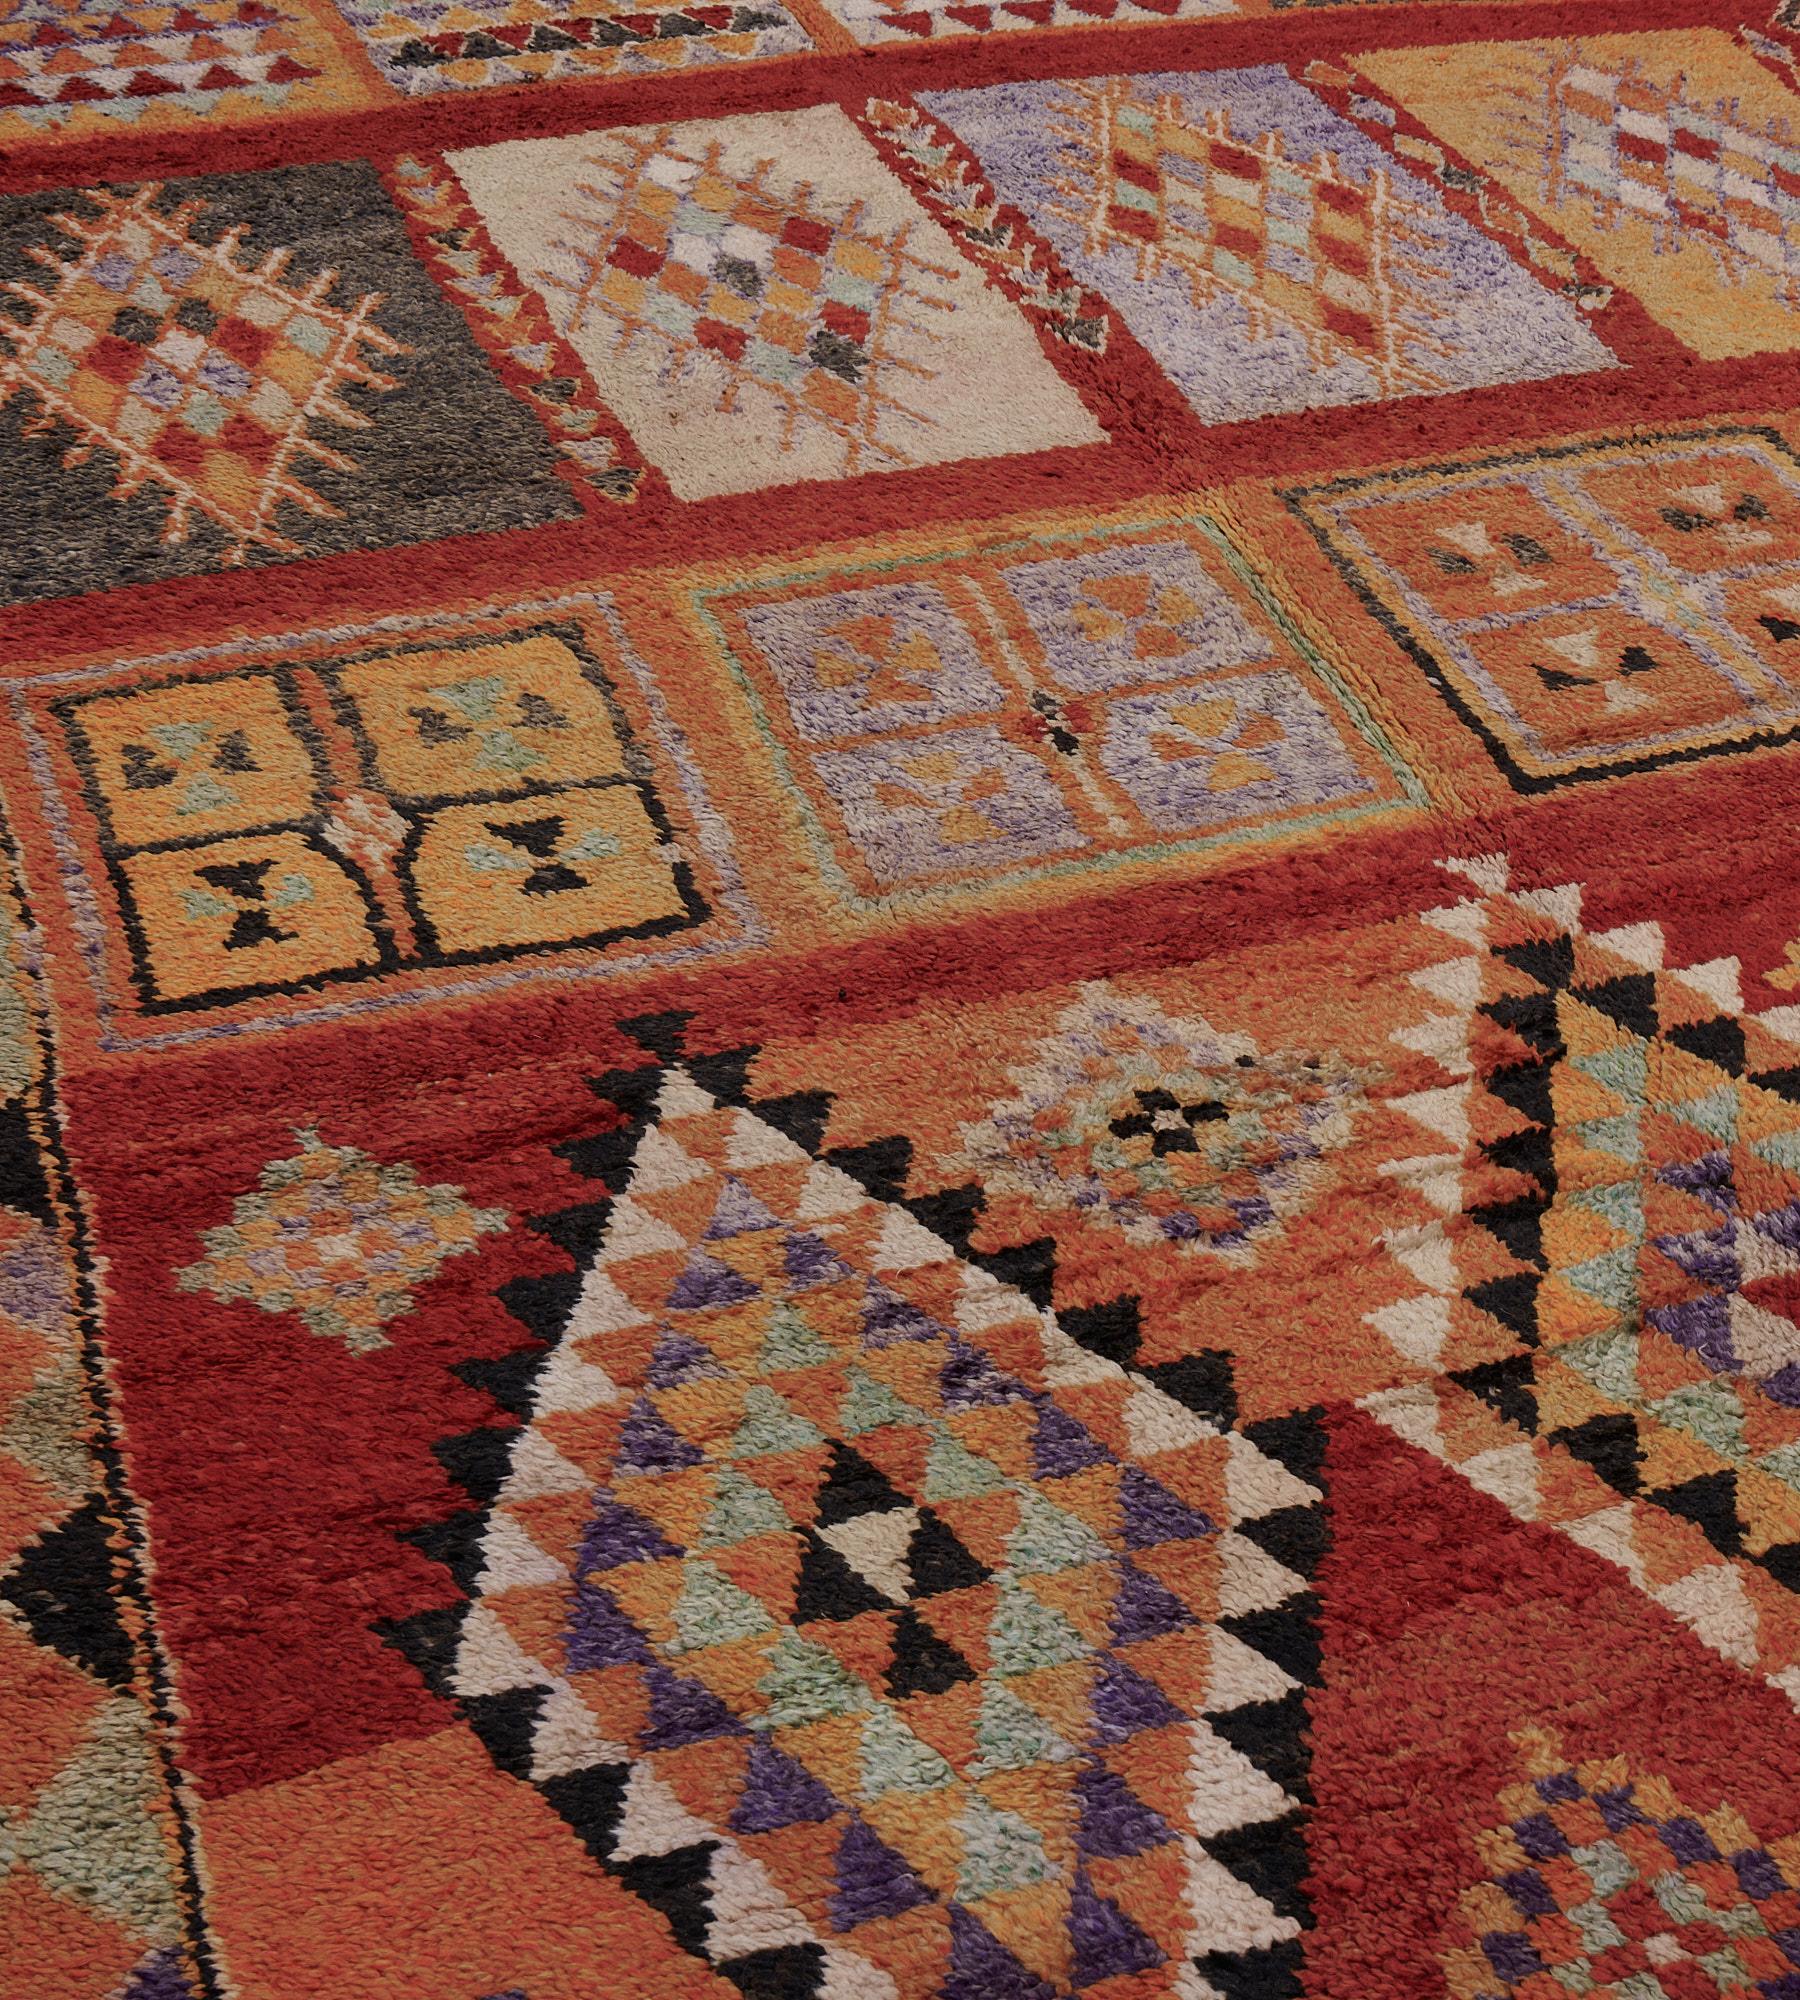 This hand woven wool vintage Moroccan rug features bold geometric patterns and lively colors.